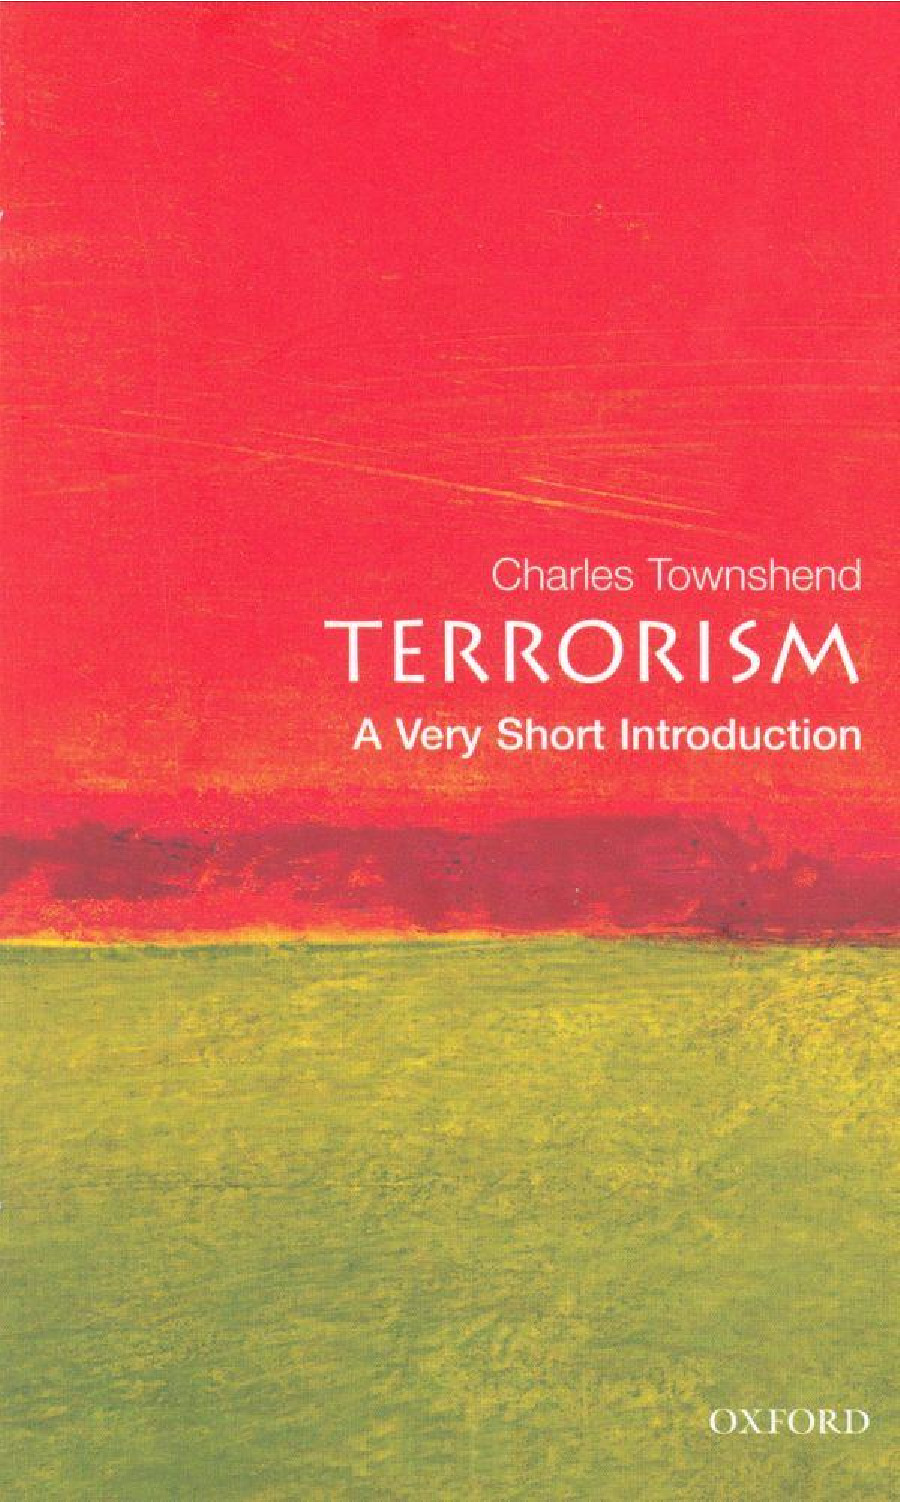 Terrorism_ A Very Short Introduction (Very Short Introductions) ( PDFDrive.com )